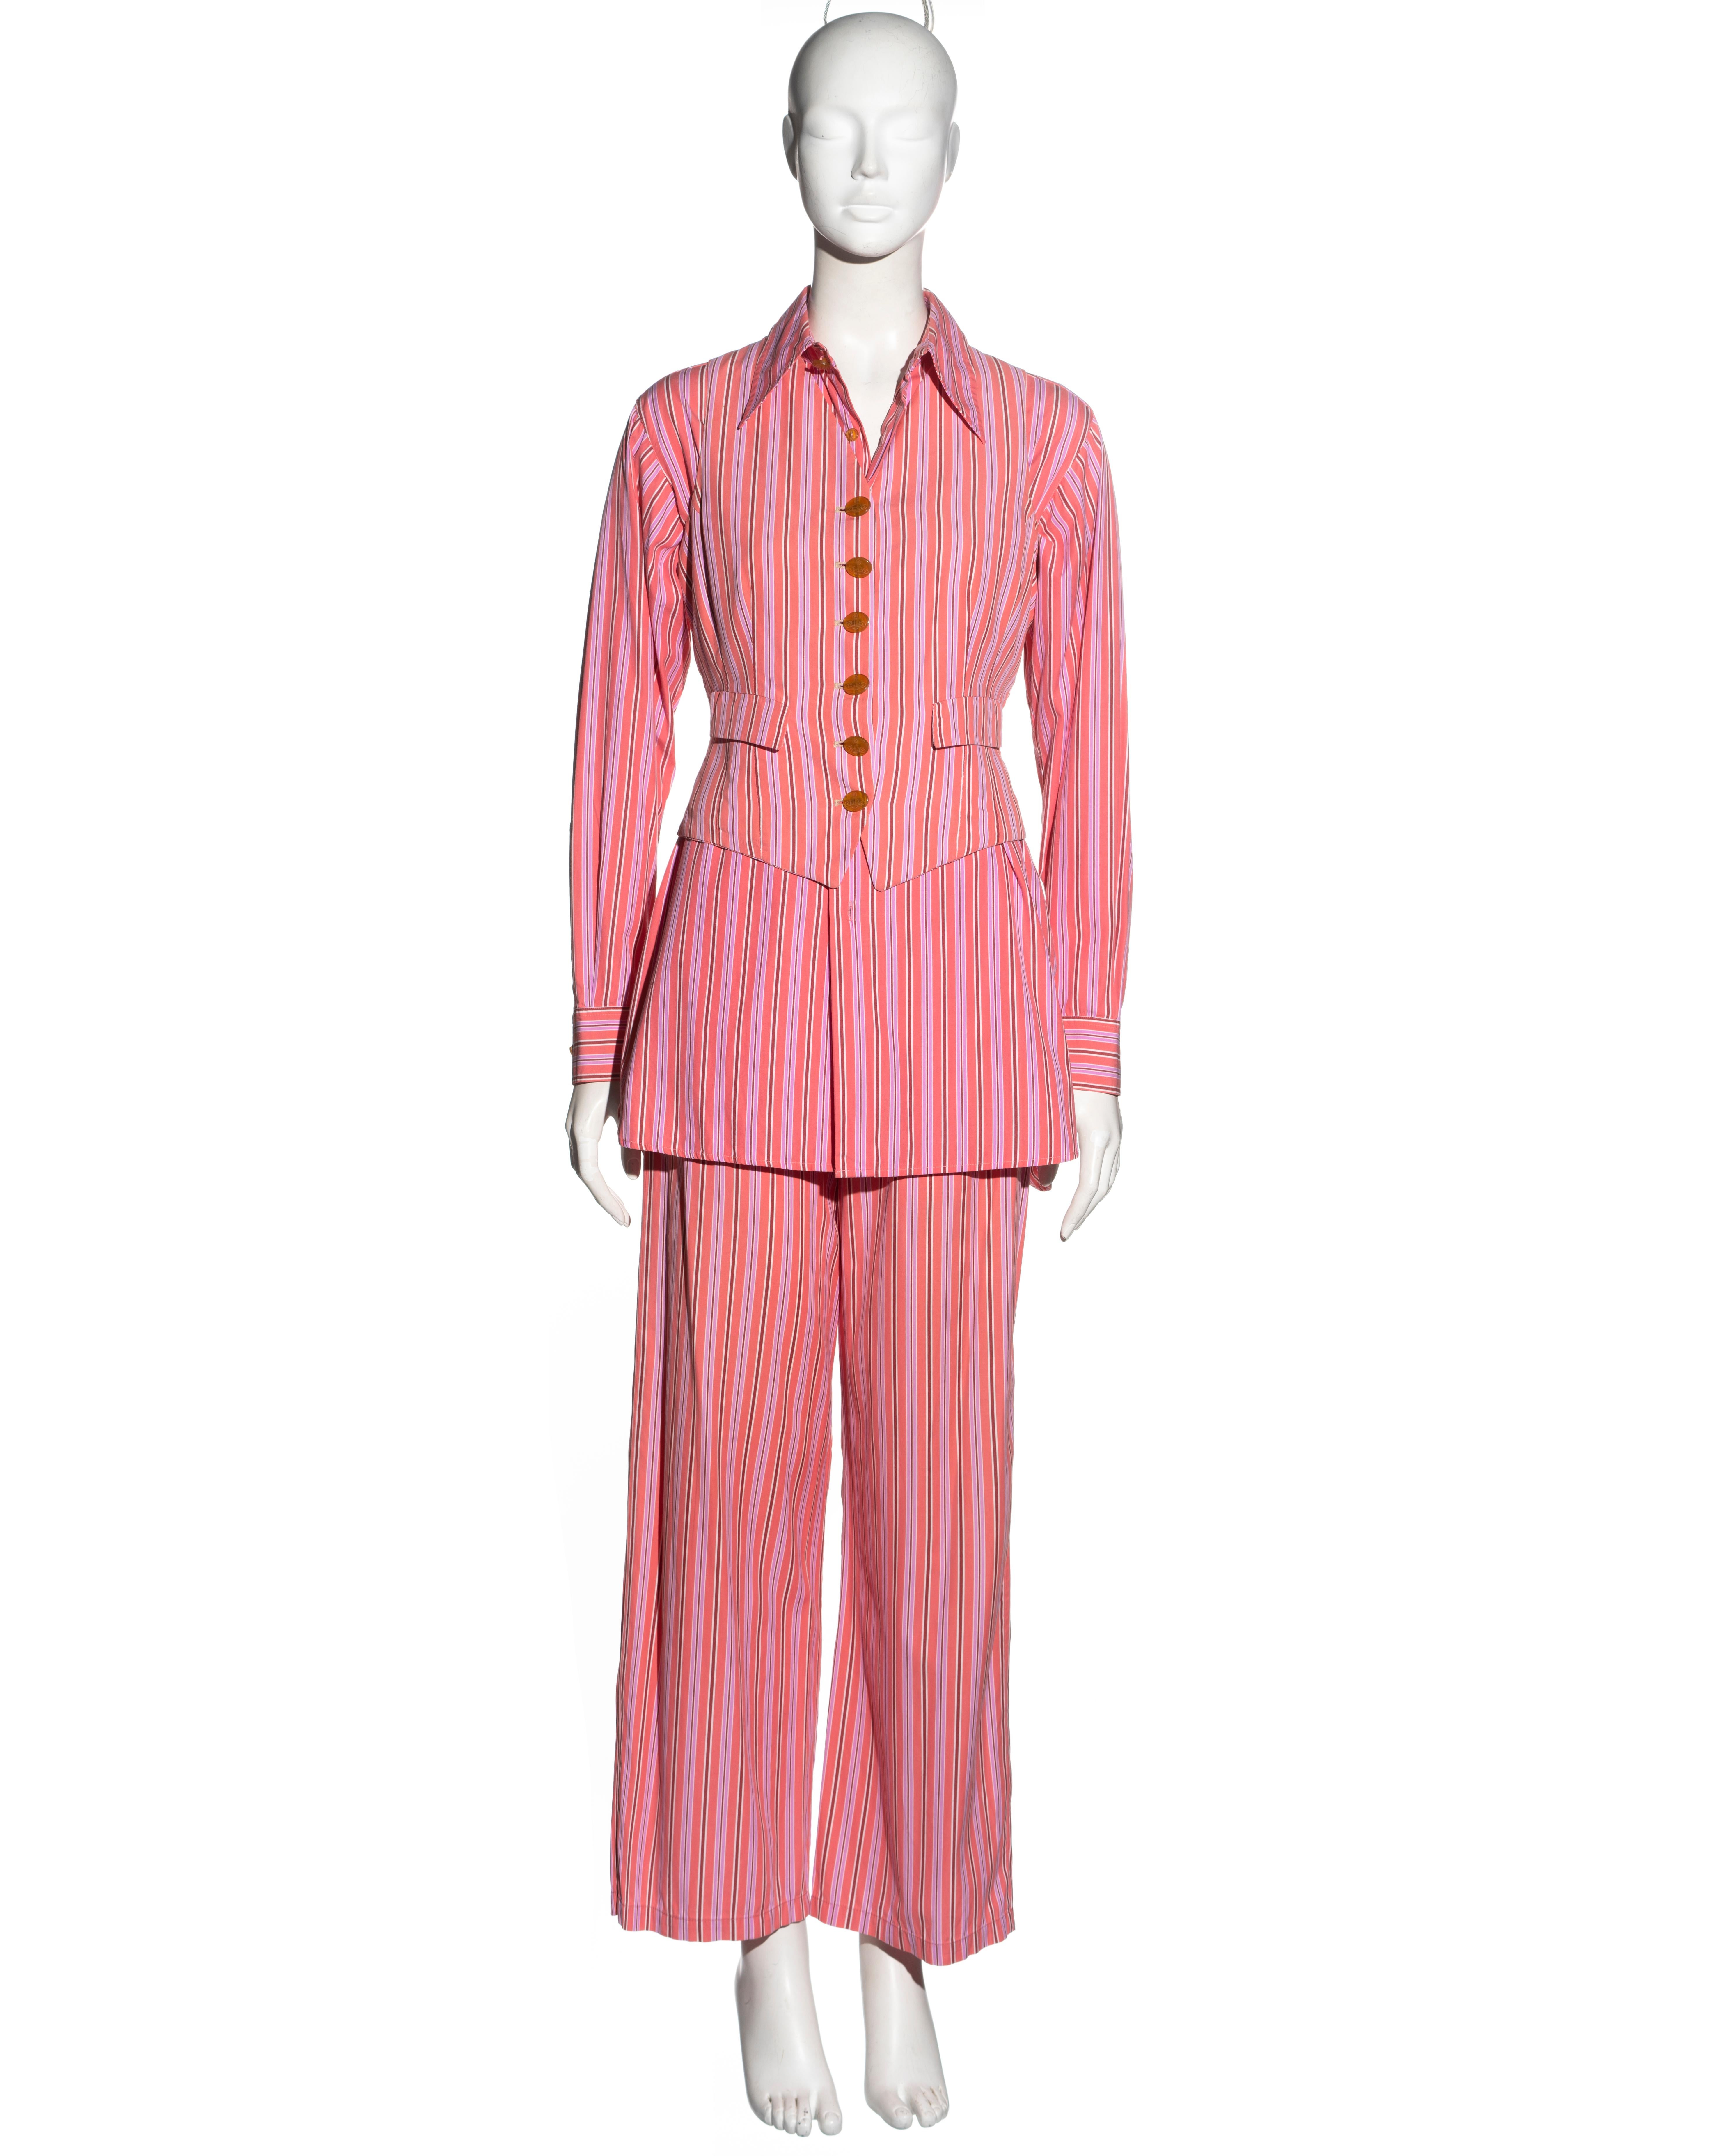 ▪ Vivienne Westwood 3-piece suit
▪ Sold by One of a Kind Archive
▪ Constructed from salmon pink cotton with burgundy, lilac and white stripes 
▪ Oversized shirt with signature embroidered orb 
▪ Fitted waistcoat with orb-etched buttons 
▪ Wide-leg